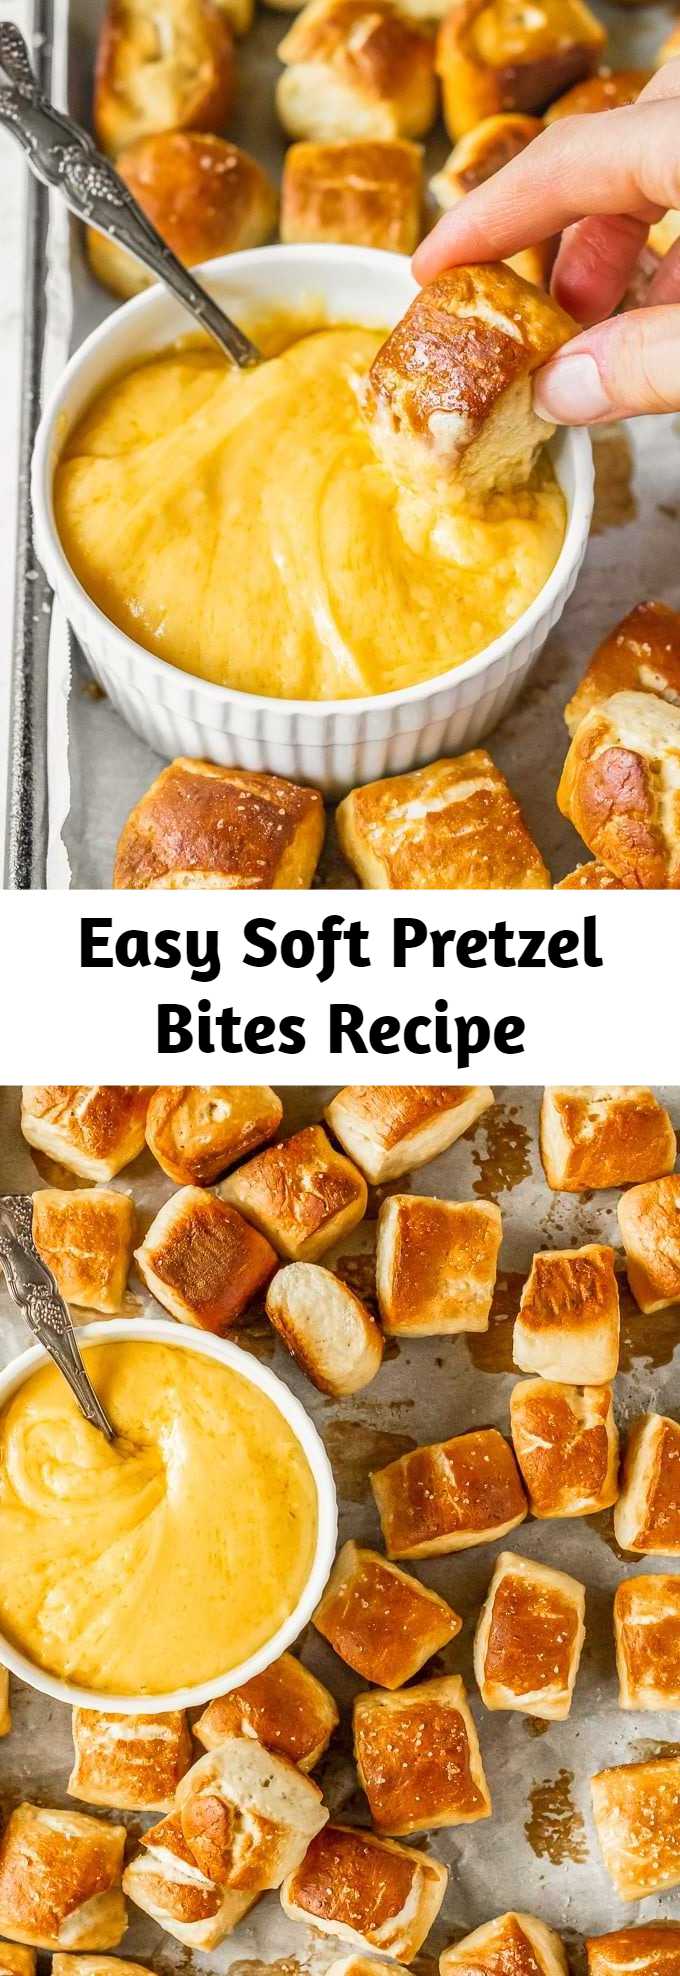 Easy Soft Pretzel Bites Recipe - This easy Soft Pretzel Bites recipe is made in under 30 minutes! Simple, salty, delicious pretzel bites to serve with cheese sauce, mustard, or dips at any party.